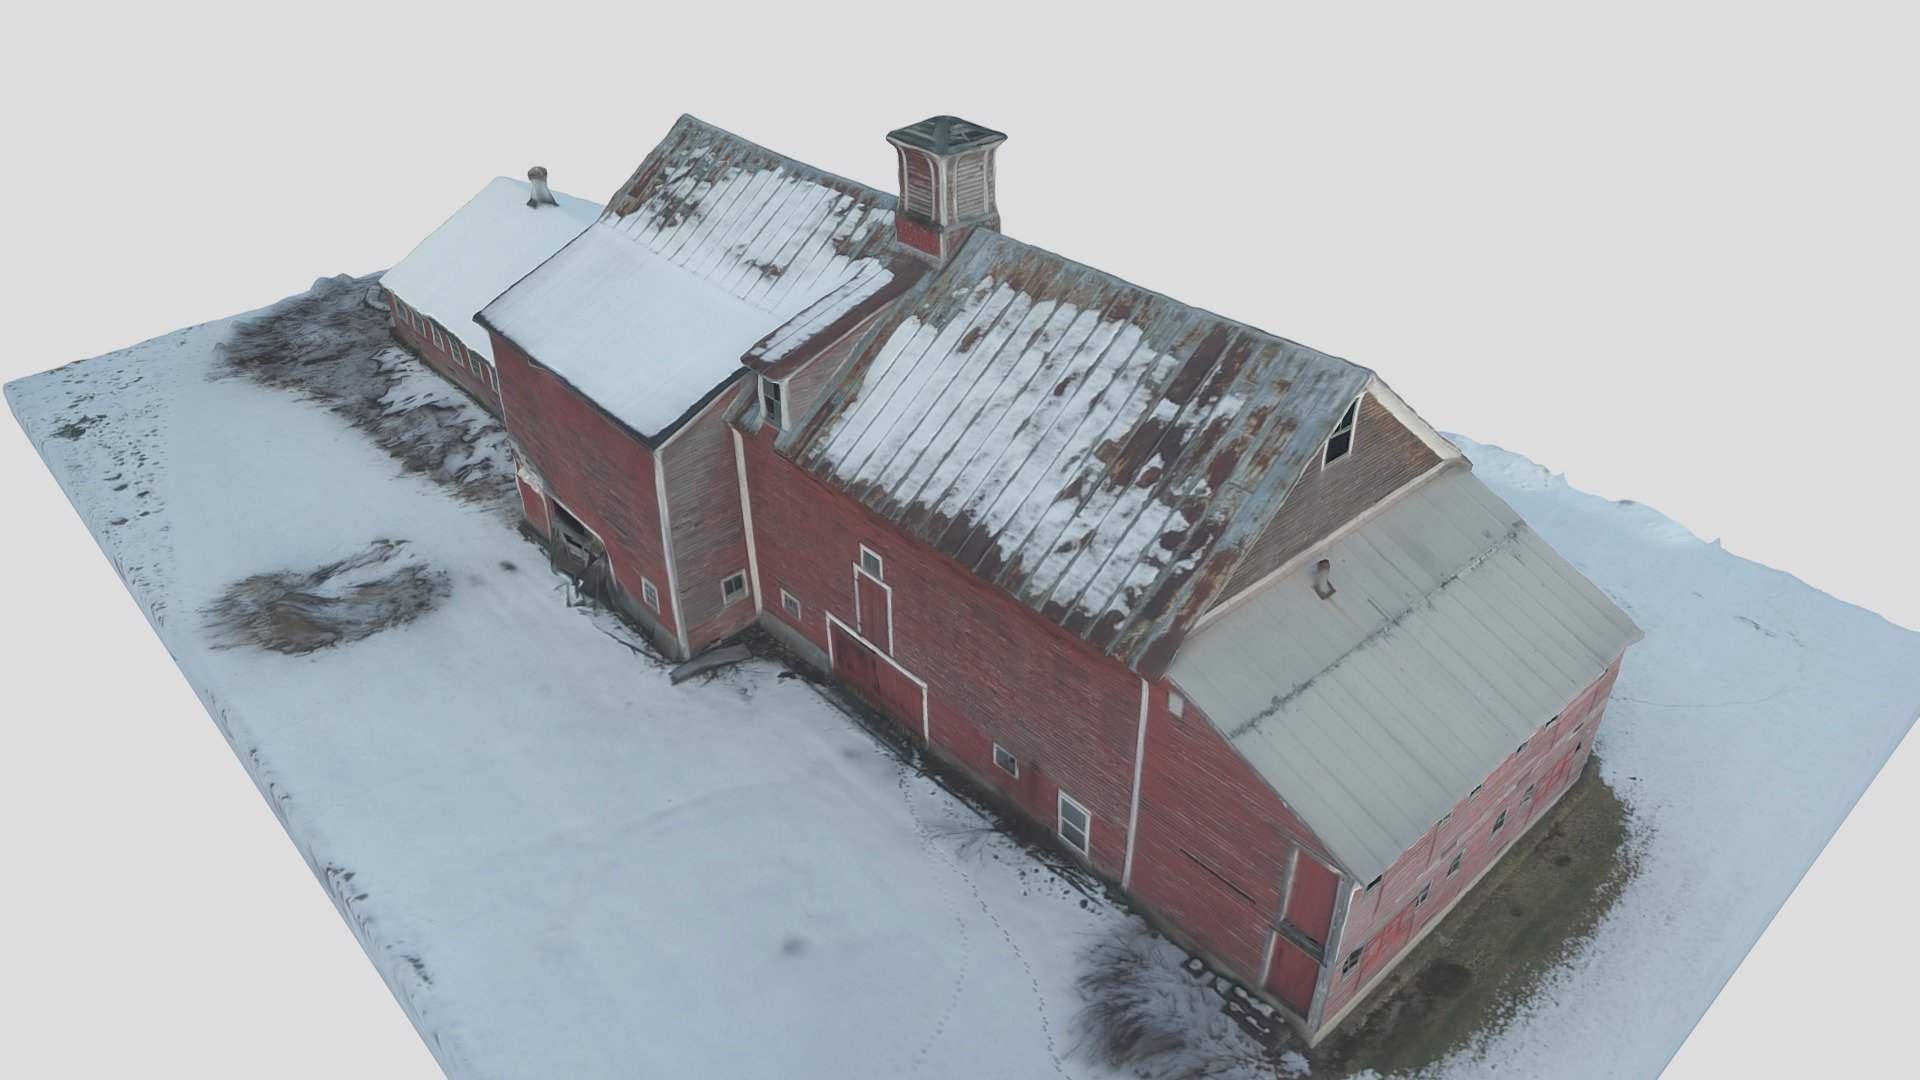 Created in RealityCapture by Capturing Reality from 753 images in 01h:11m:05s.

Scan from Littleton, New Hampshire - Red snowy barn (photogrammetry scan) - Buy Royalty Free 3D model by Austin Beaulier (@Austin.Beaulier) 3d model